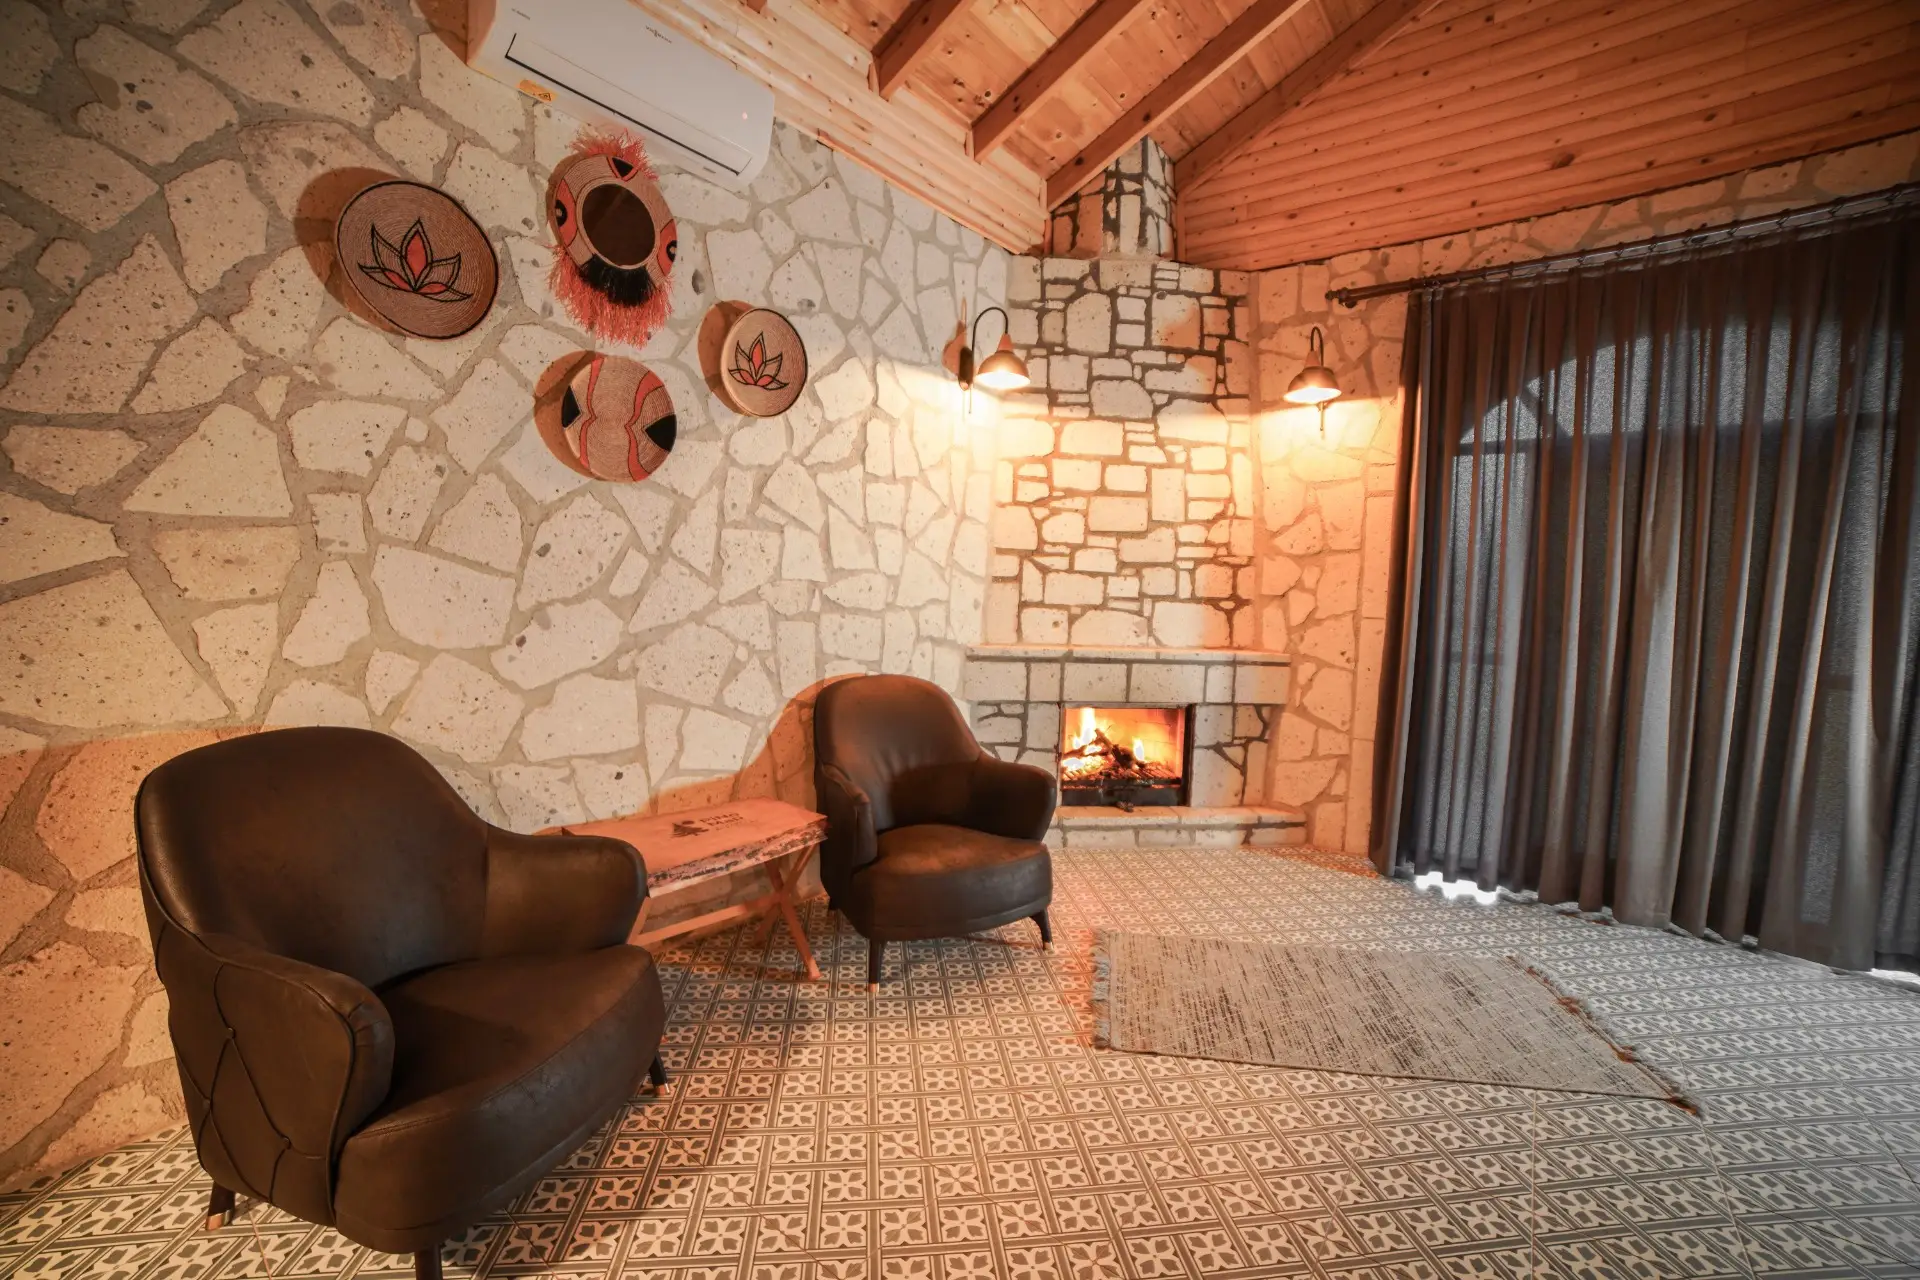 Hotel Recommendations with Fireplace to Stay in Winter